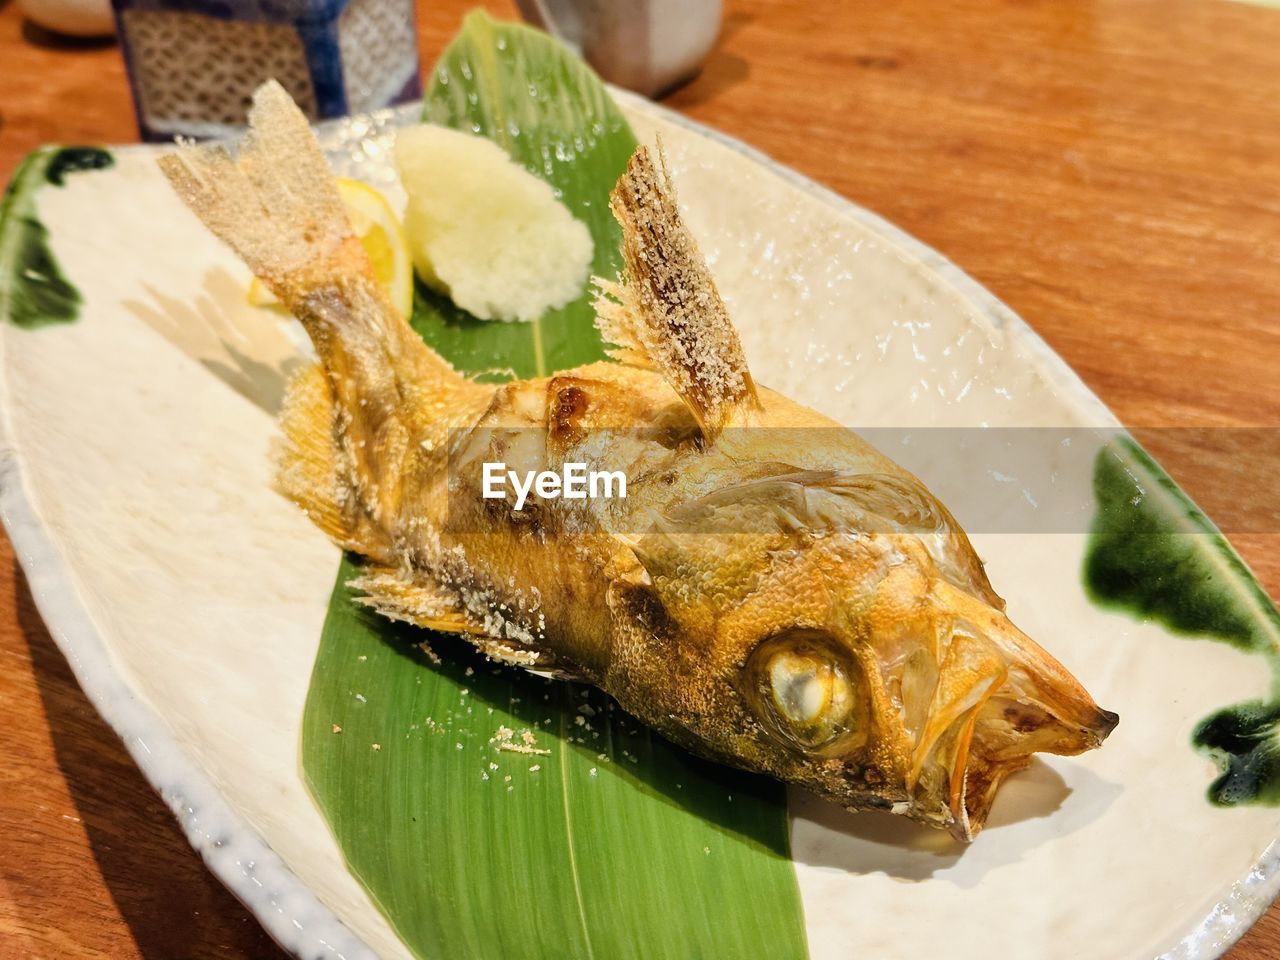 food and drink, food, fish, freshness, seafood, healthy eating, dish, wellbeing, table, cuisine, animal, indoors, no people, close-up, asian food, japanese food, plate, wood, leaf, high angle view, serving size, still life, plant part, sardine, produce, culture